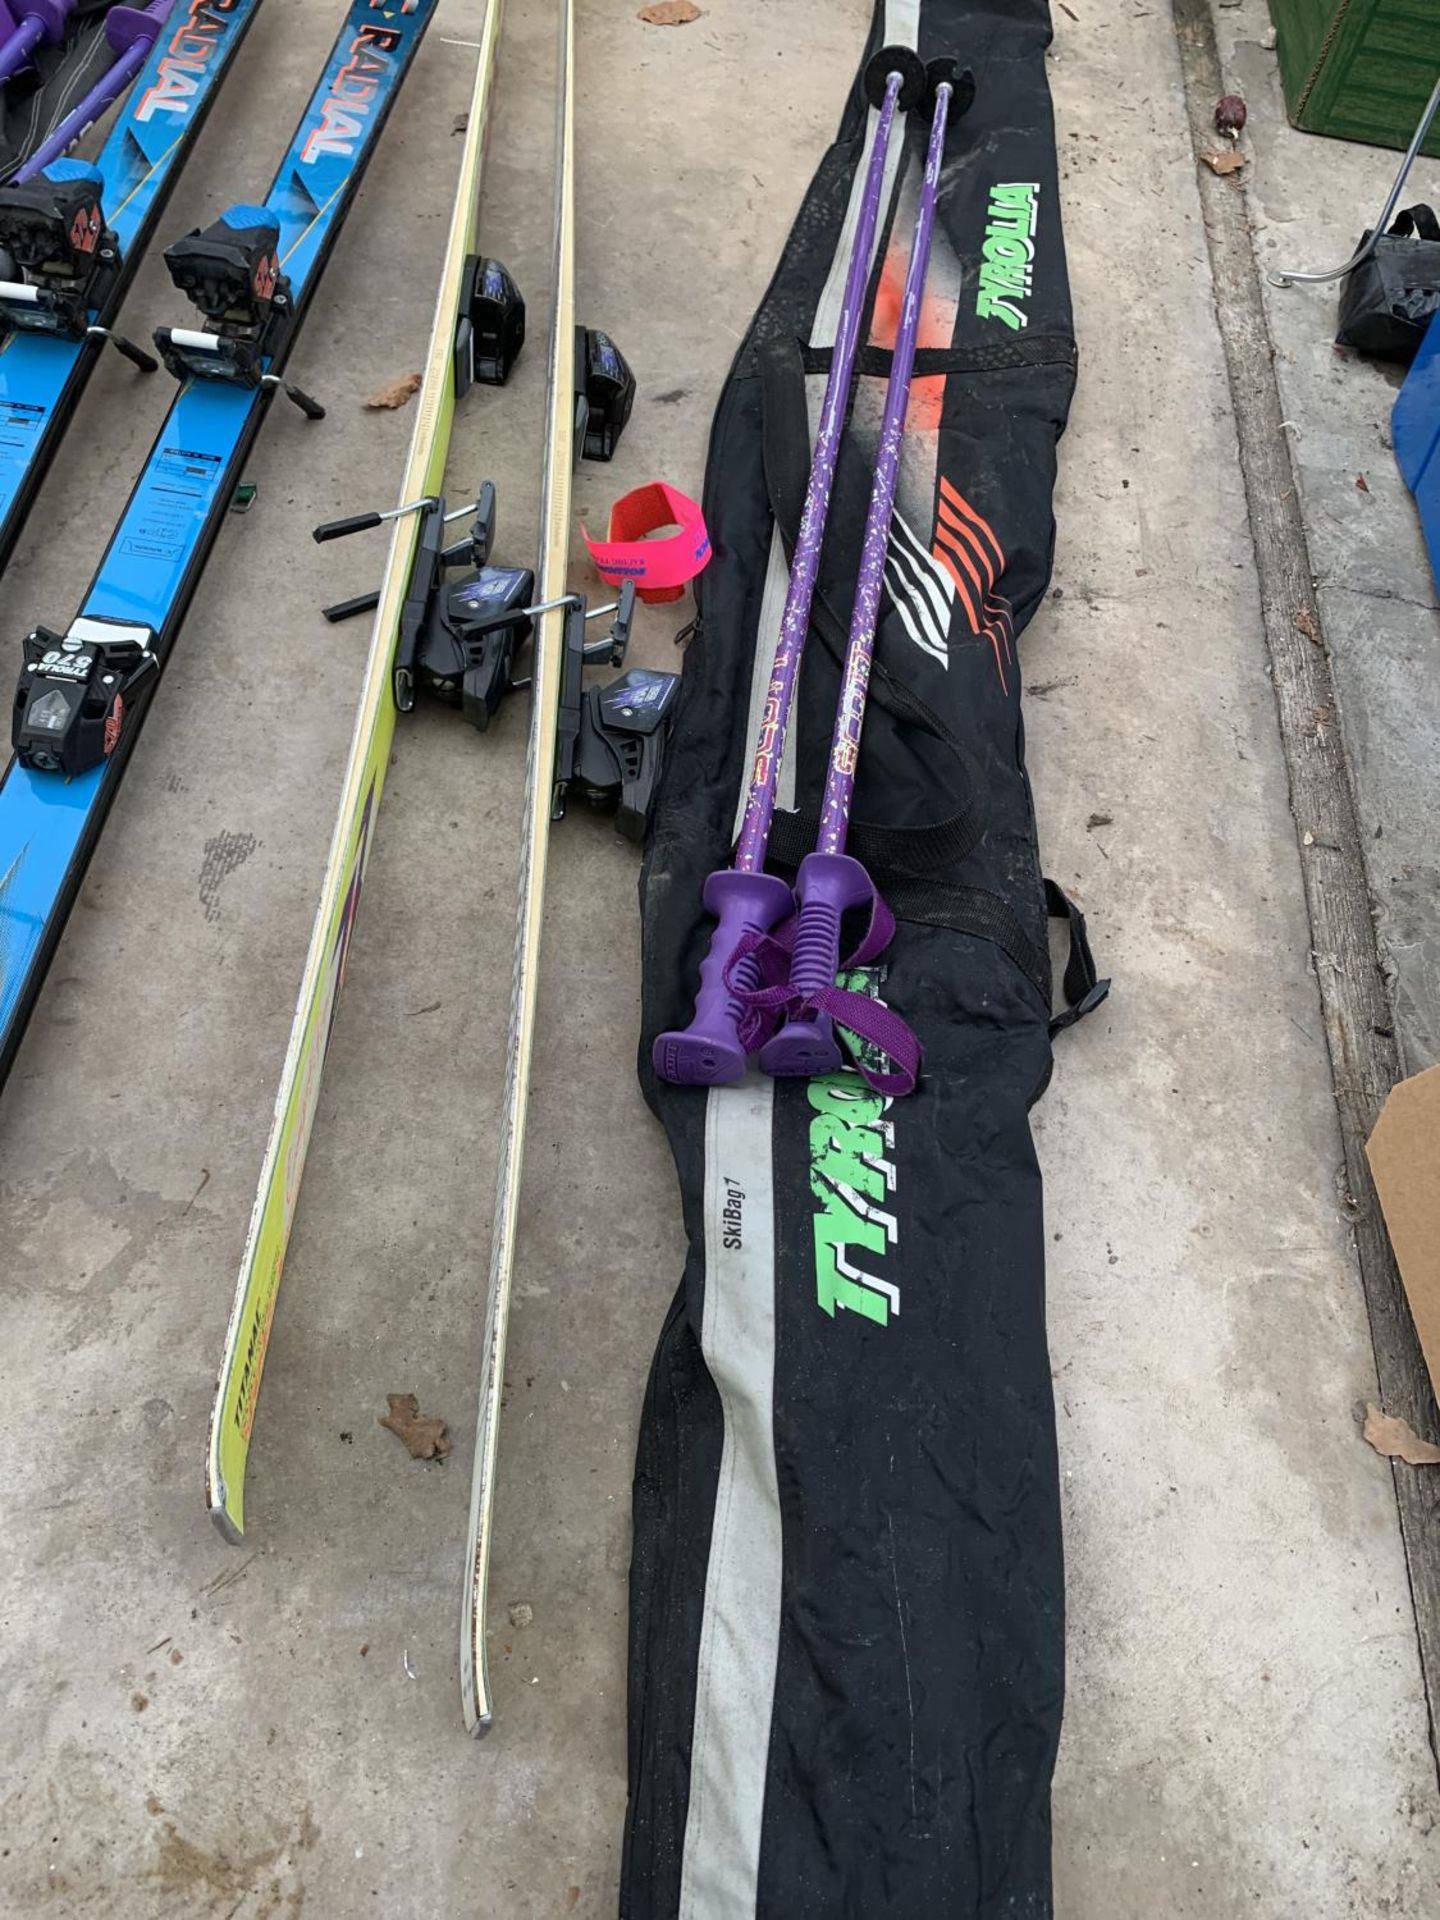 TWO SETS OF SKI'S COMPLETE WITH CARRY CASES - Image 3 of 4